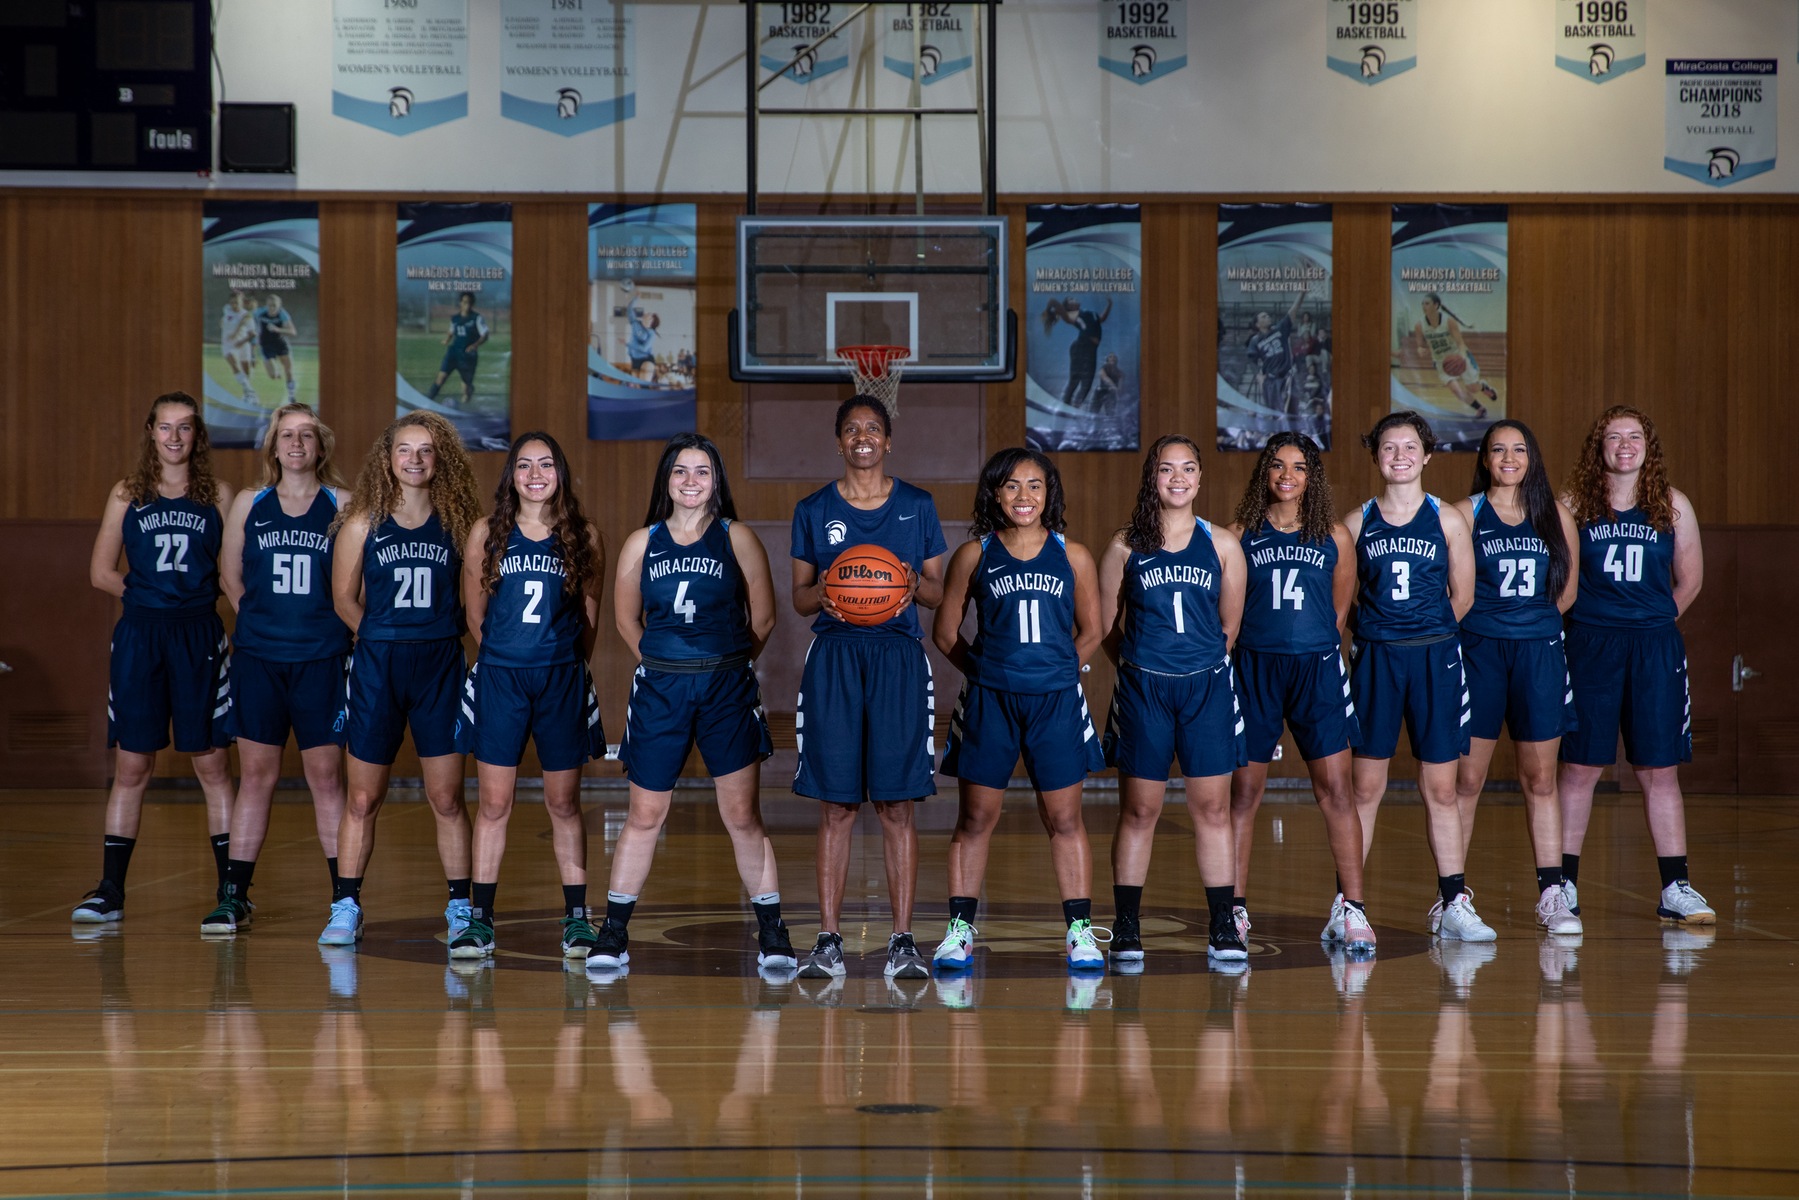 Women's Basketball team picture